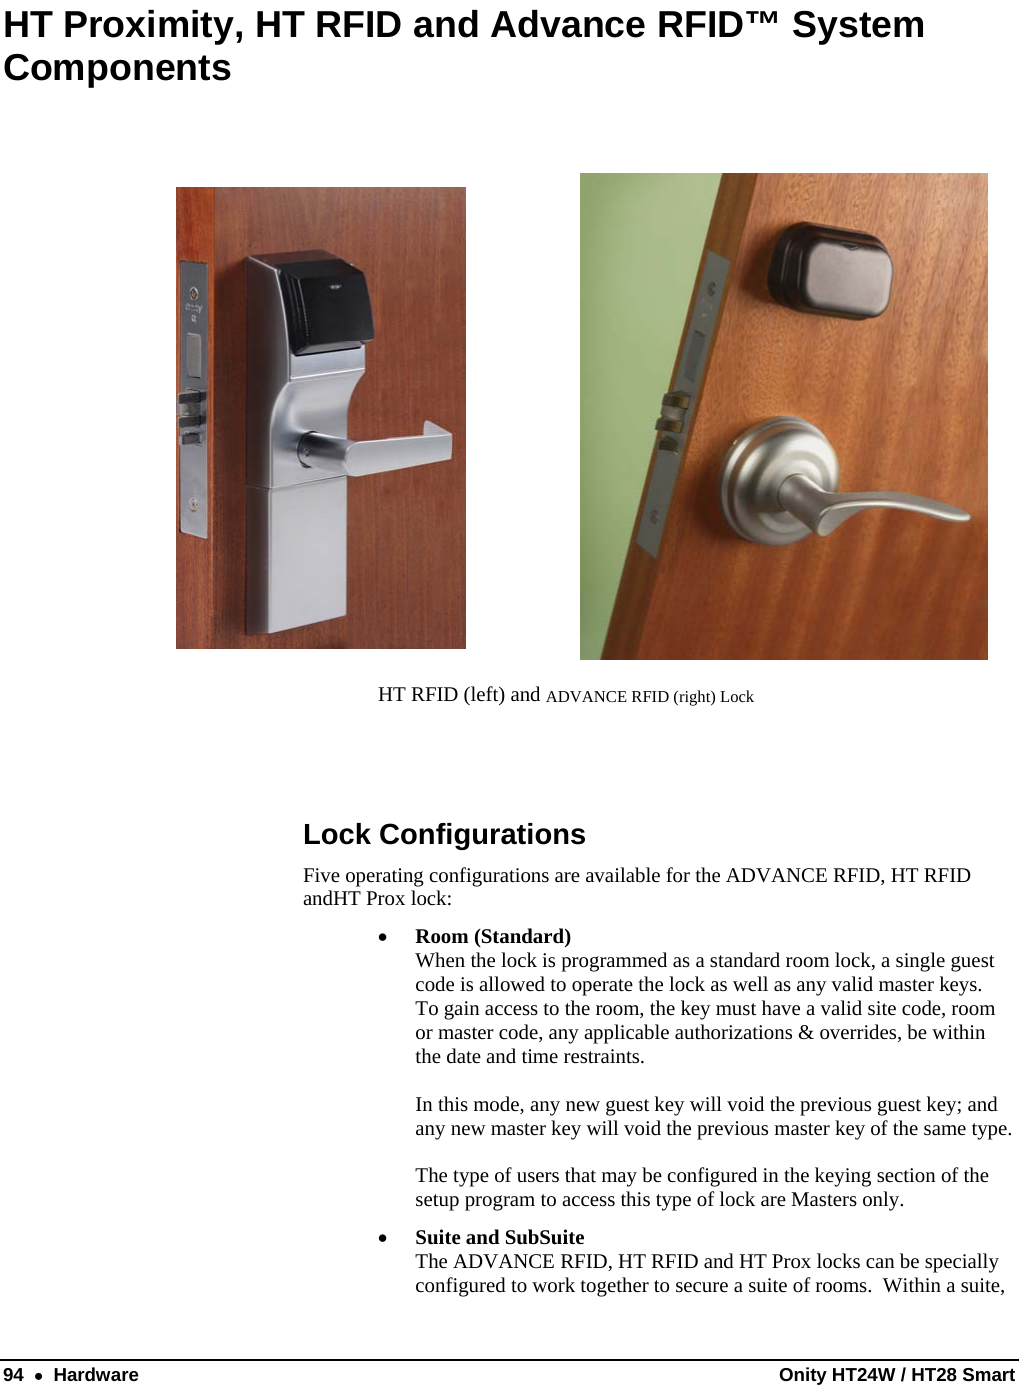  94  •  Hardware  Onity HT24W / HT28 Smart HT Proximity, HT RFID and Advance RFID™ System Components             HT RFID (left) and ADVANCE RFID (right) Lock   Lock Configurations Five operating configurations are available for the ADVANCE RFID, HT RFID andHT Prox lock: • Room (Standard)  When the lock is programmed as a standard room lock, a single guest code is allowed to operate the lock as well as any valid master keys.  To gain access to the room, the key must have a valid site code, room or master code, any applicable authorizations &amp; overrides, be within the date and time restraints.  In this mode, any new guest key will void the previous guest key; and any new master key will void the previous master key of the same type.  The type of users that may be configured in the keying section of the setup program to access this type of lock are Masters only. • Suite and SubSuite The ADVANCE RFID, HT RFID and HT Prox locks can be specially configured to work together to secure a suite of rooms.  Within a suite, 